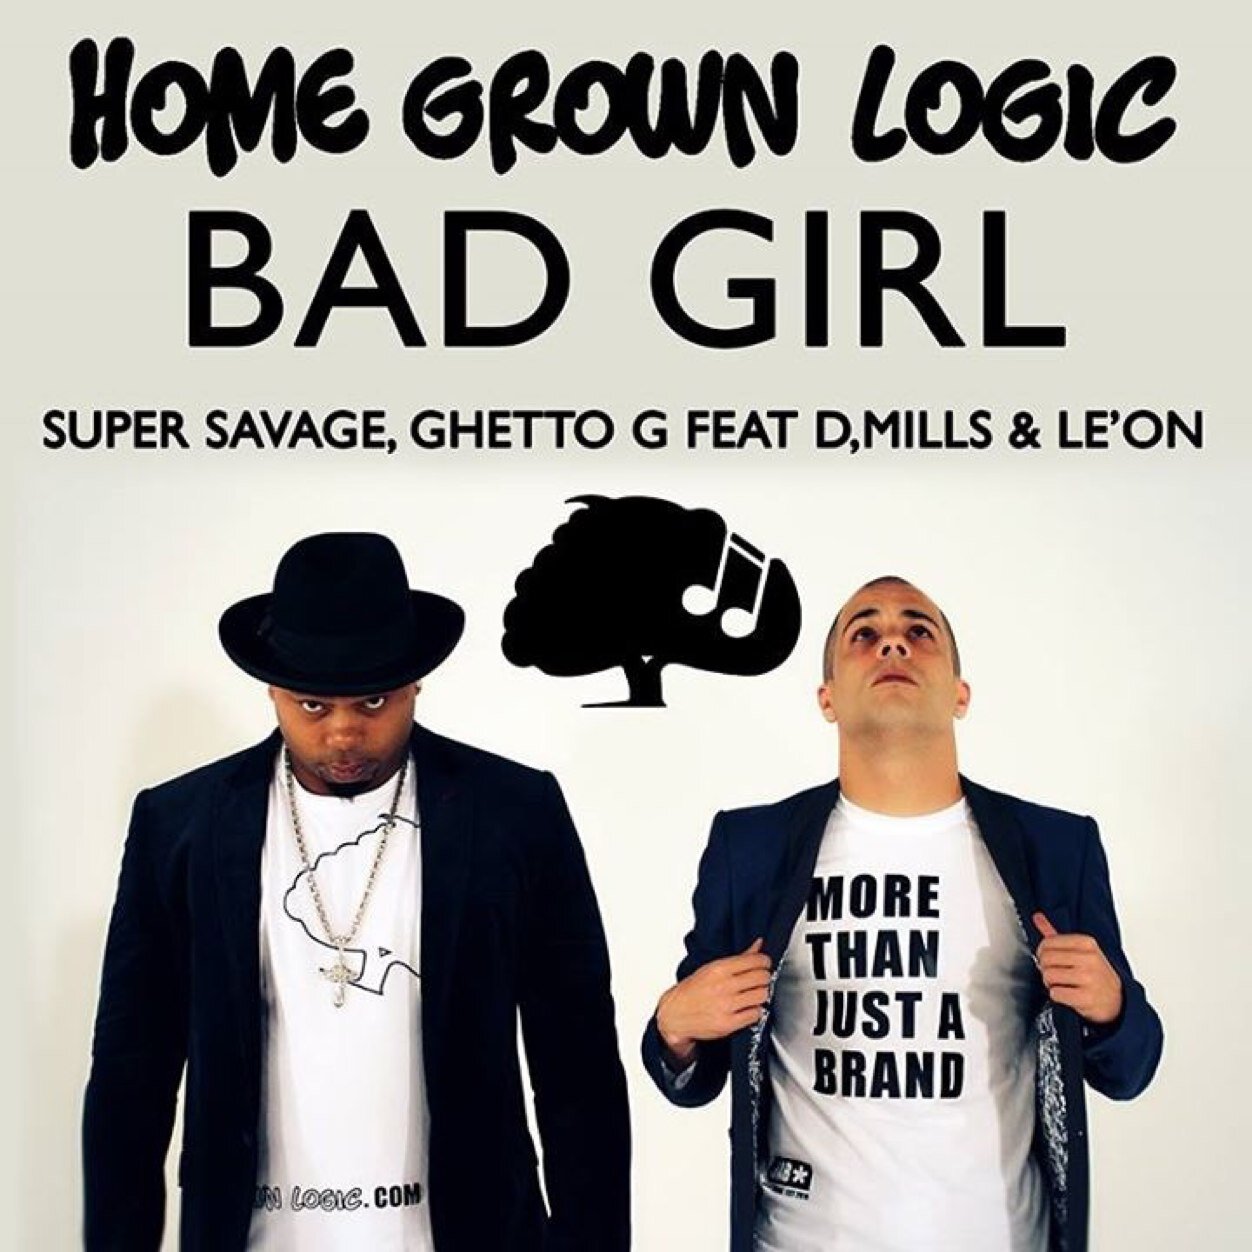 HomeGrown logic BBD1C02 is a Indi ladel from Birmingham UK - Artists, Songwriters & beats. #homegrownlogic Instagram follow us Facebook soundCloud comment.